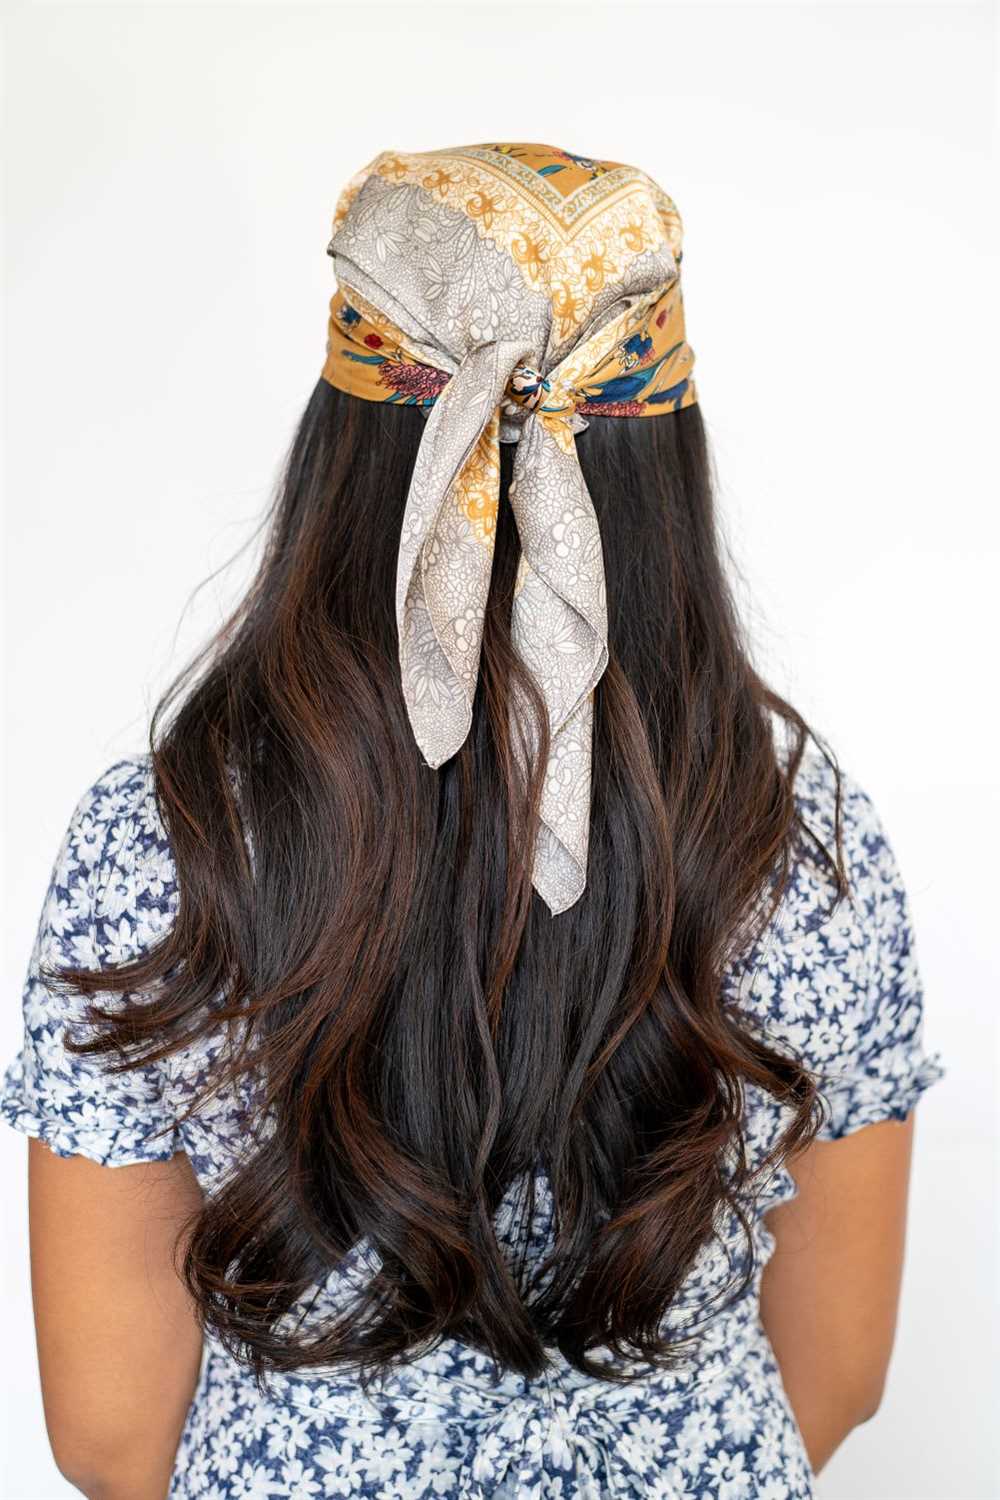 How to wear silk scarf in hair